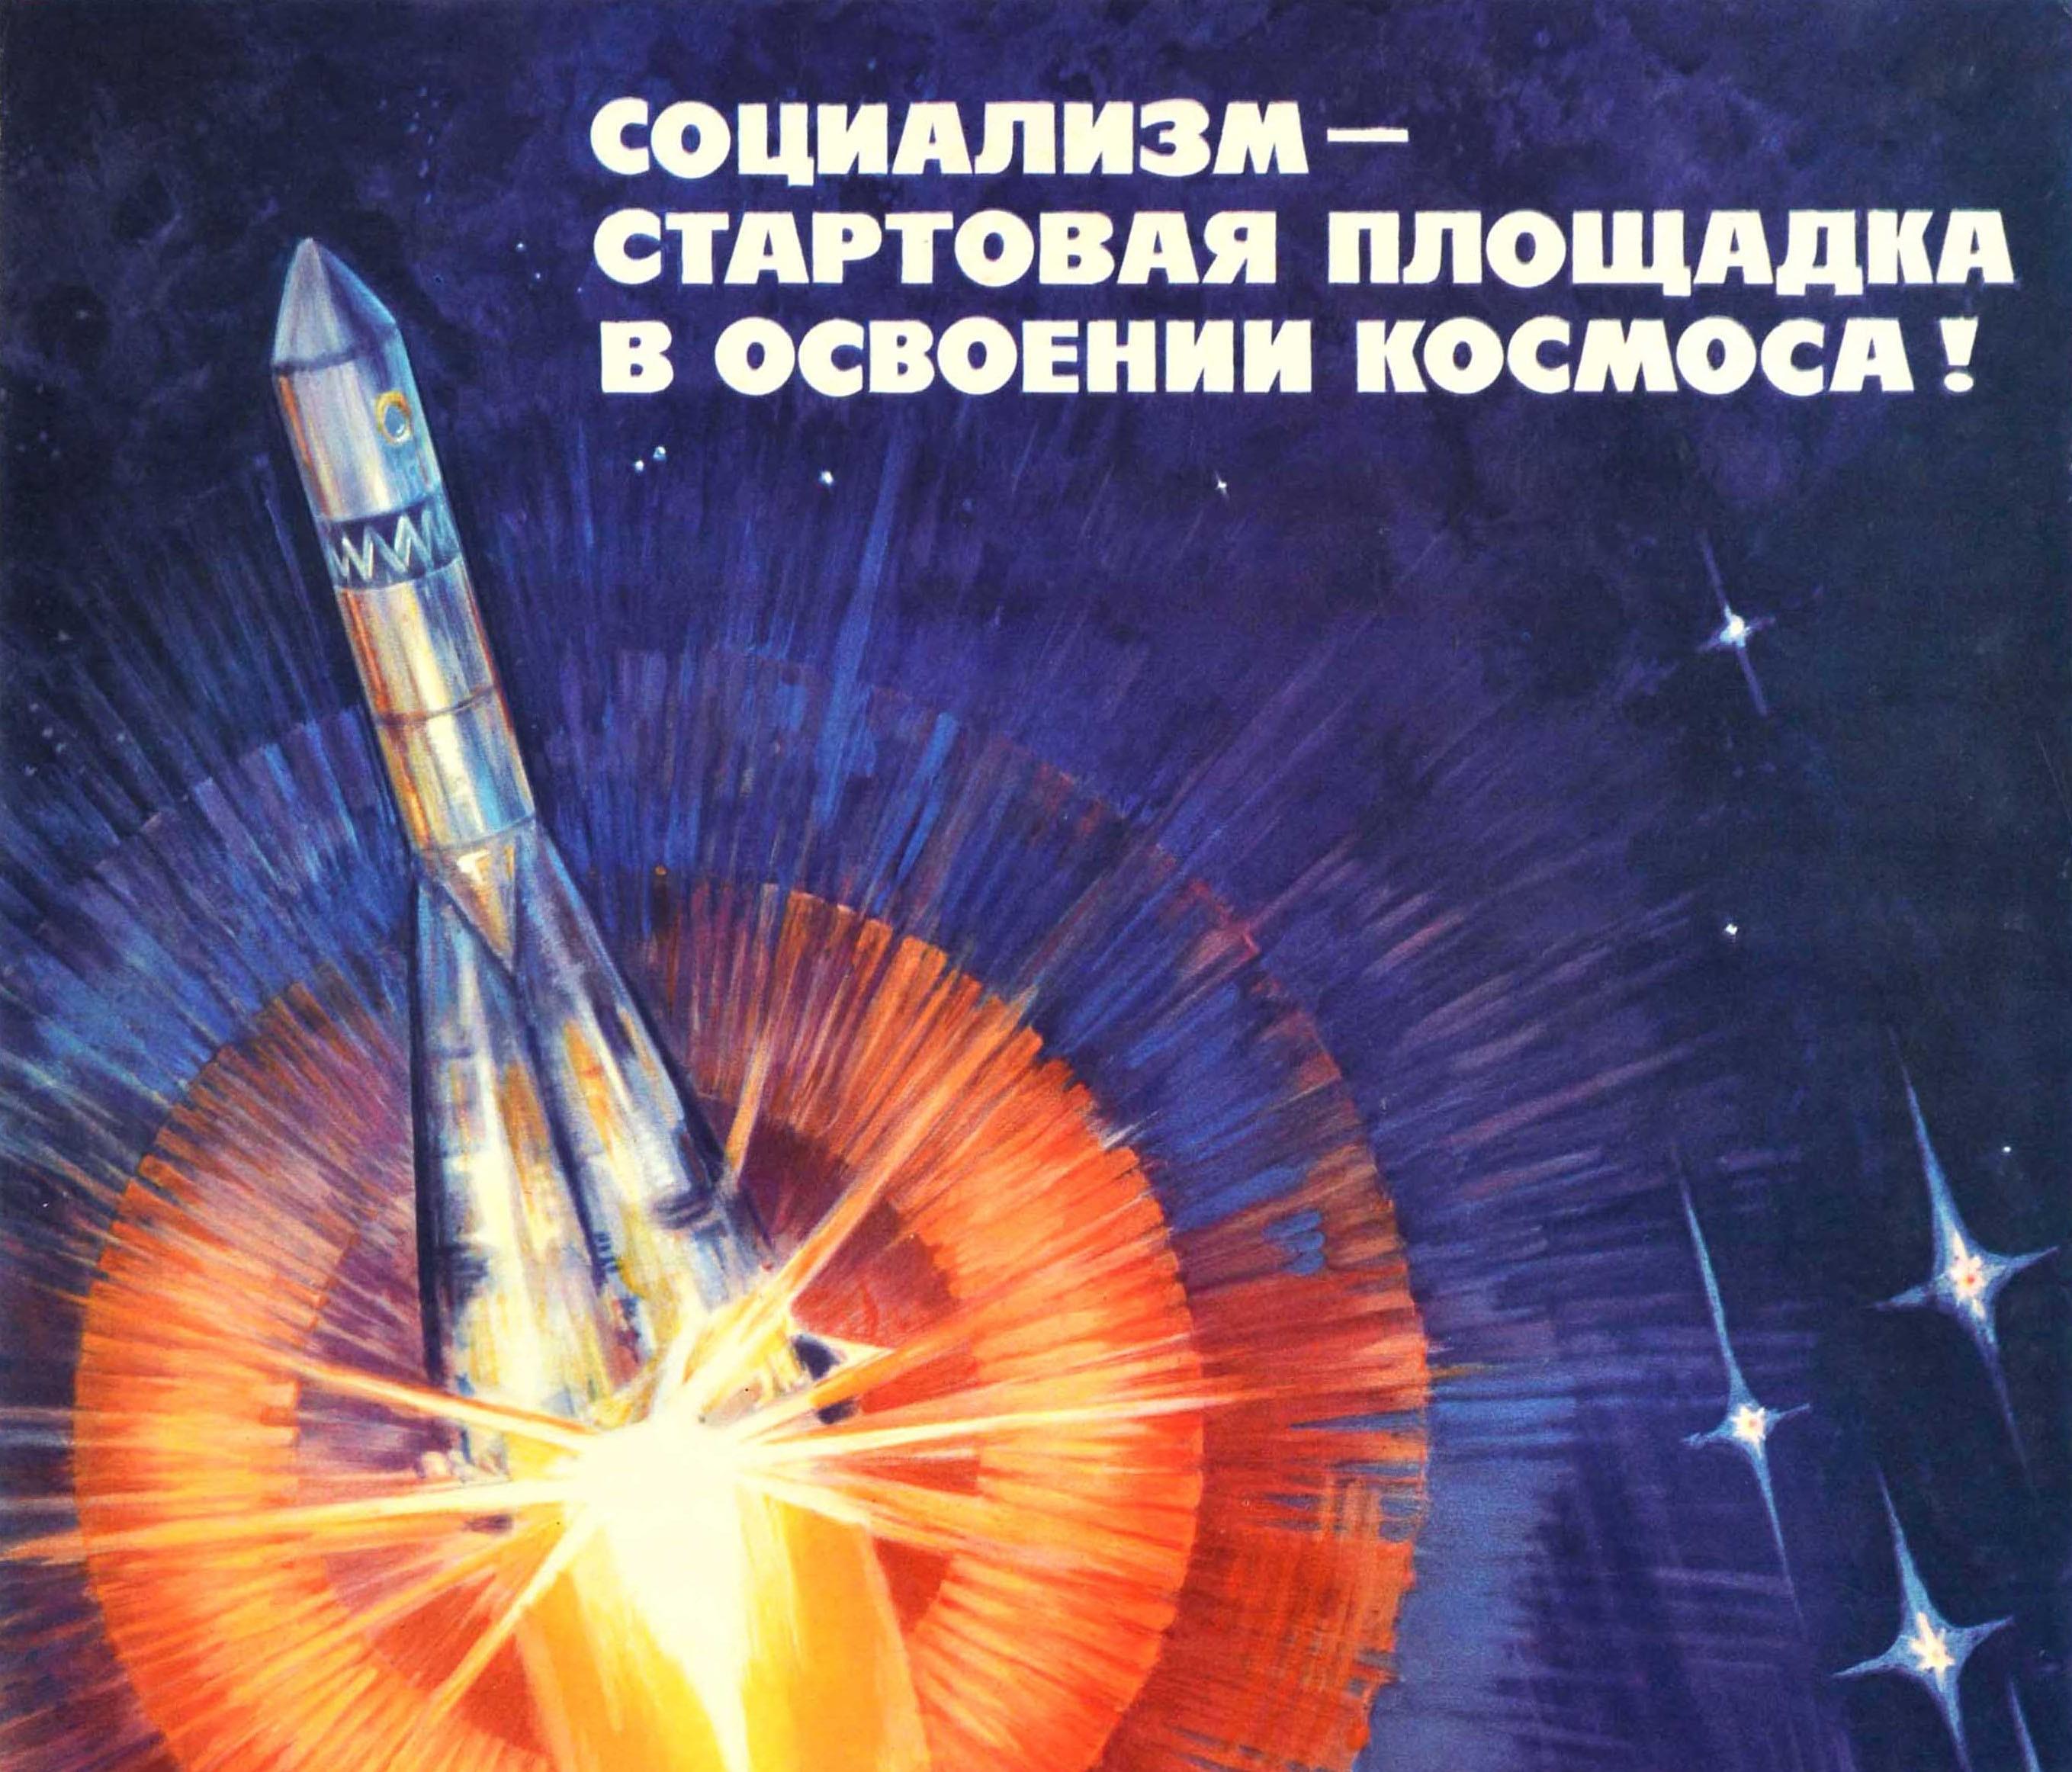 Original vintage Soviet space propaganda poster - Socialism is the Launch Pad to Space Exploration! Dynamic design depicting a rocket launching into space from a hammer and sickle emblem against a starry background. Very good condition, minor